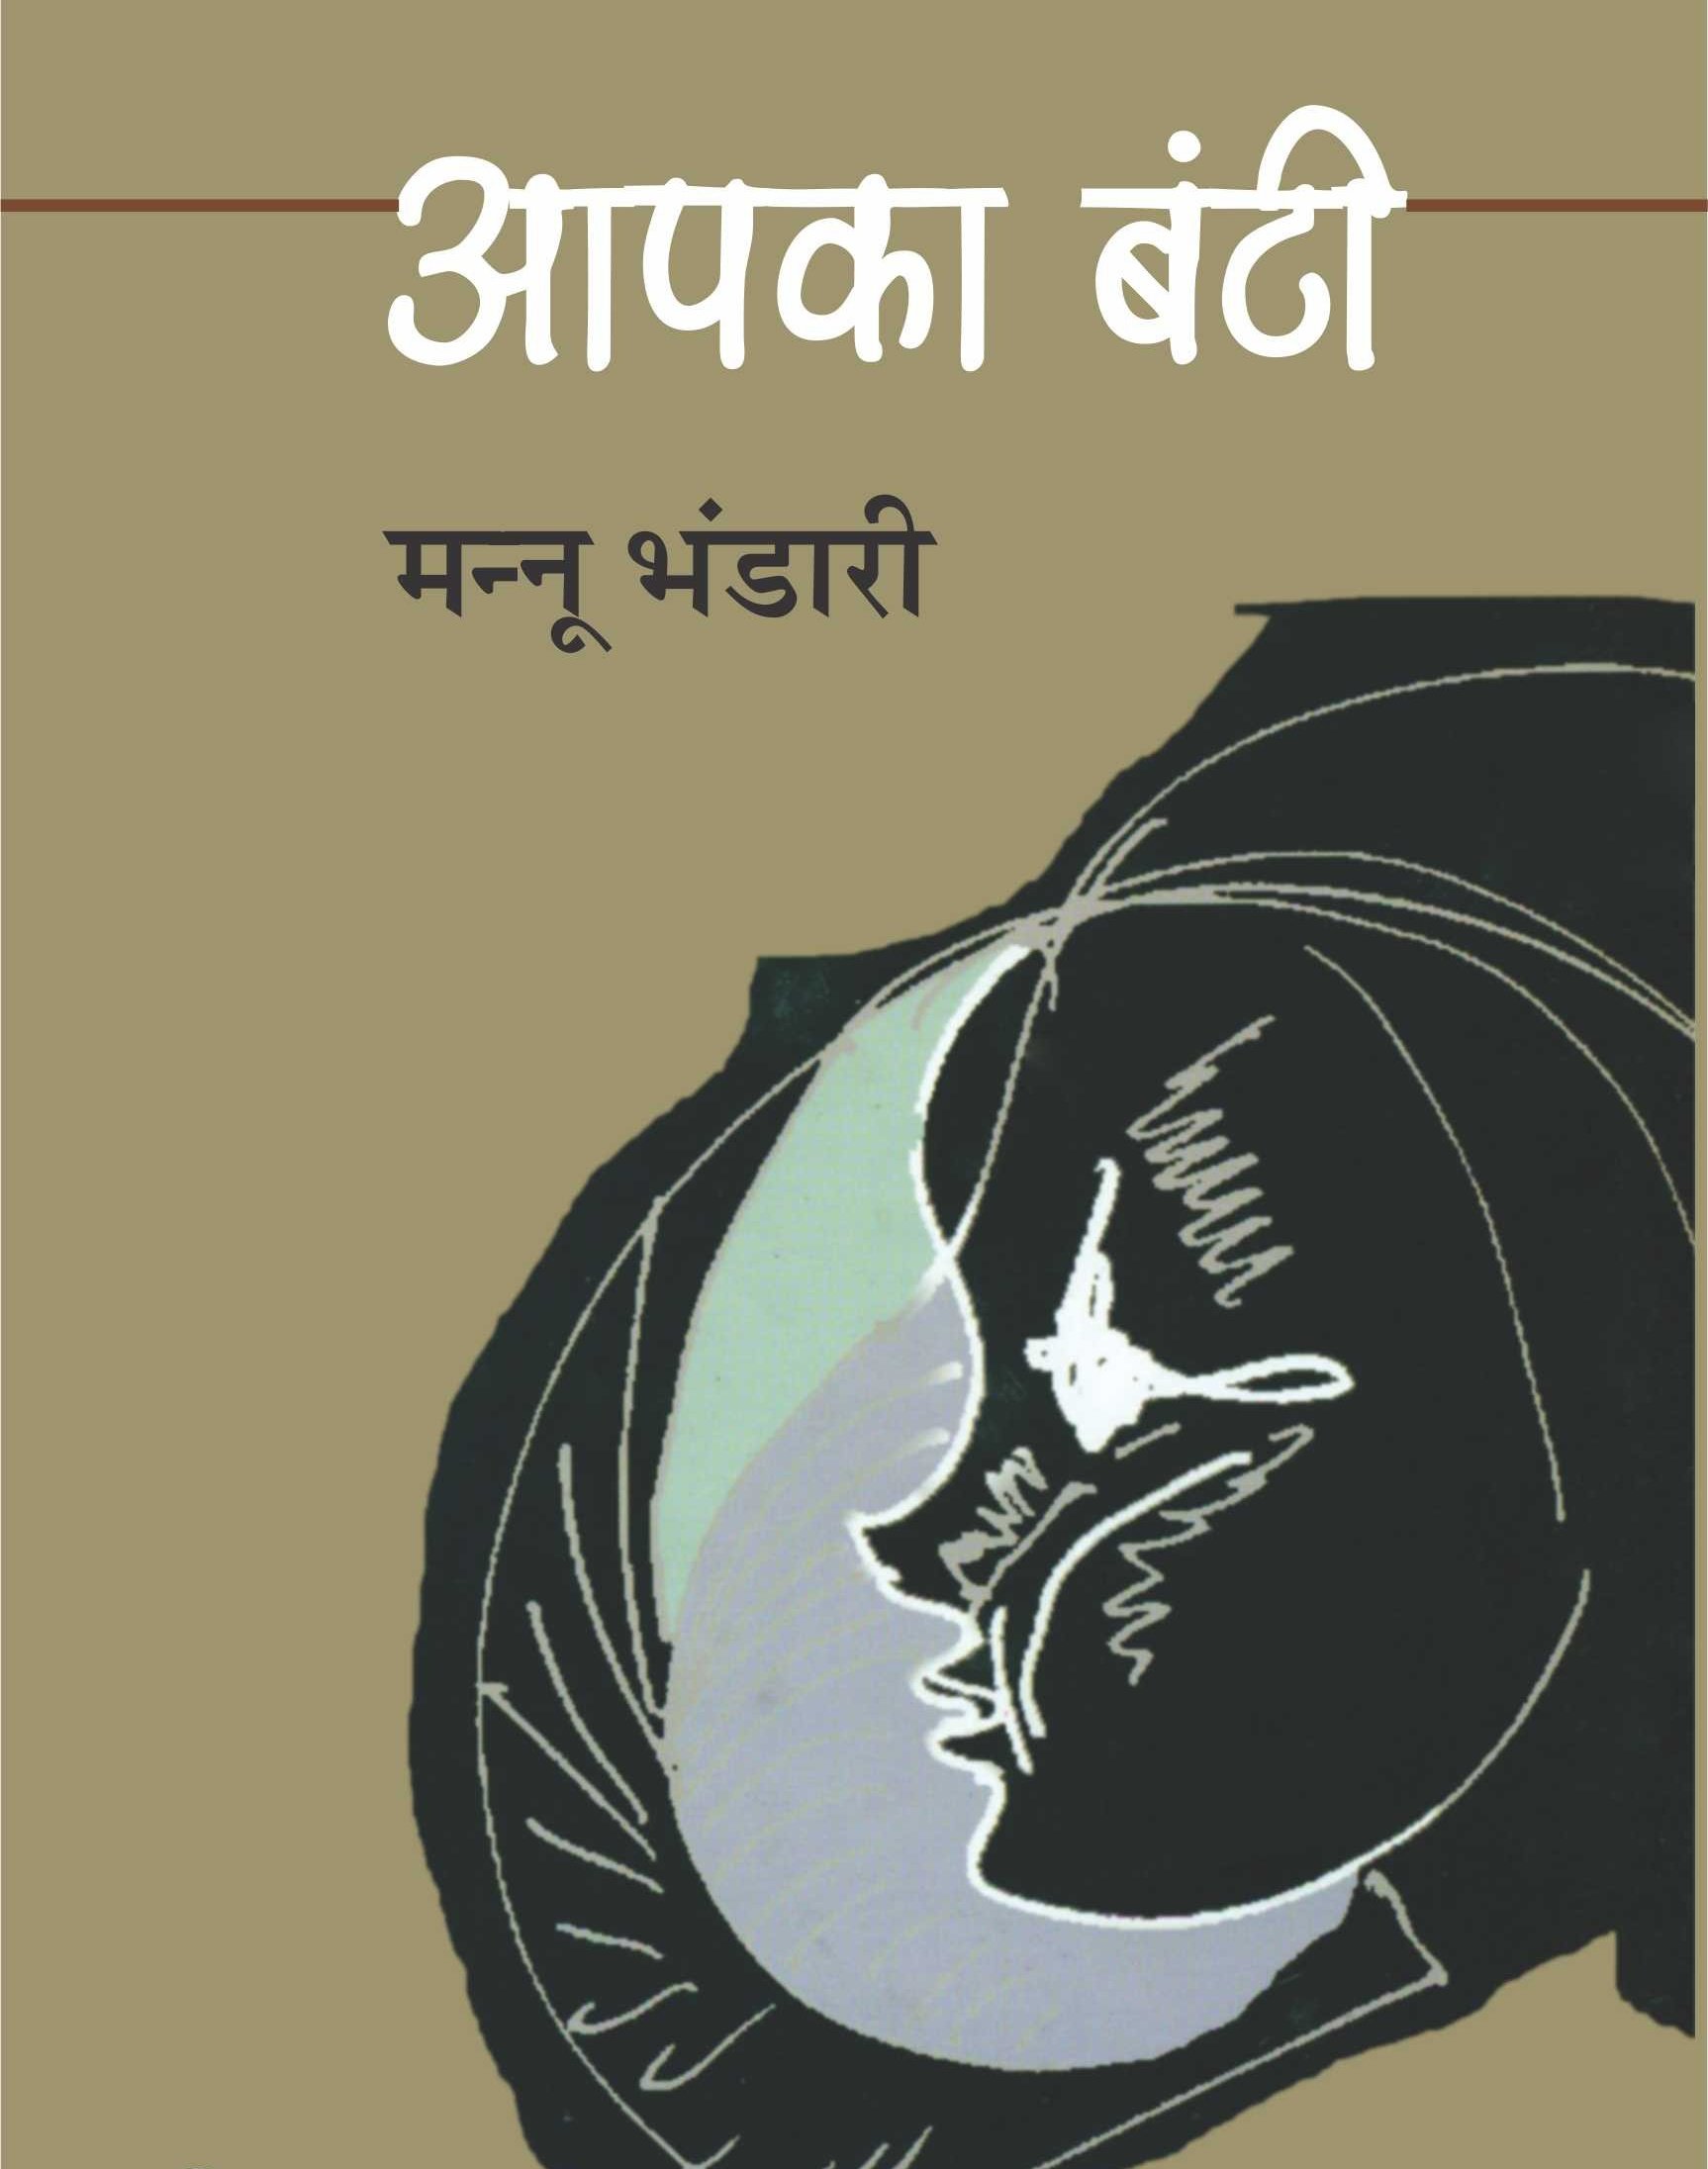 book review of any book in hindi language